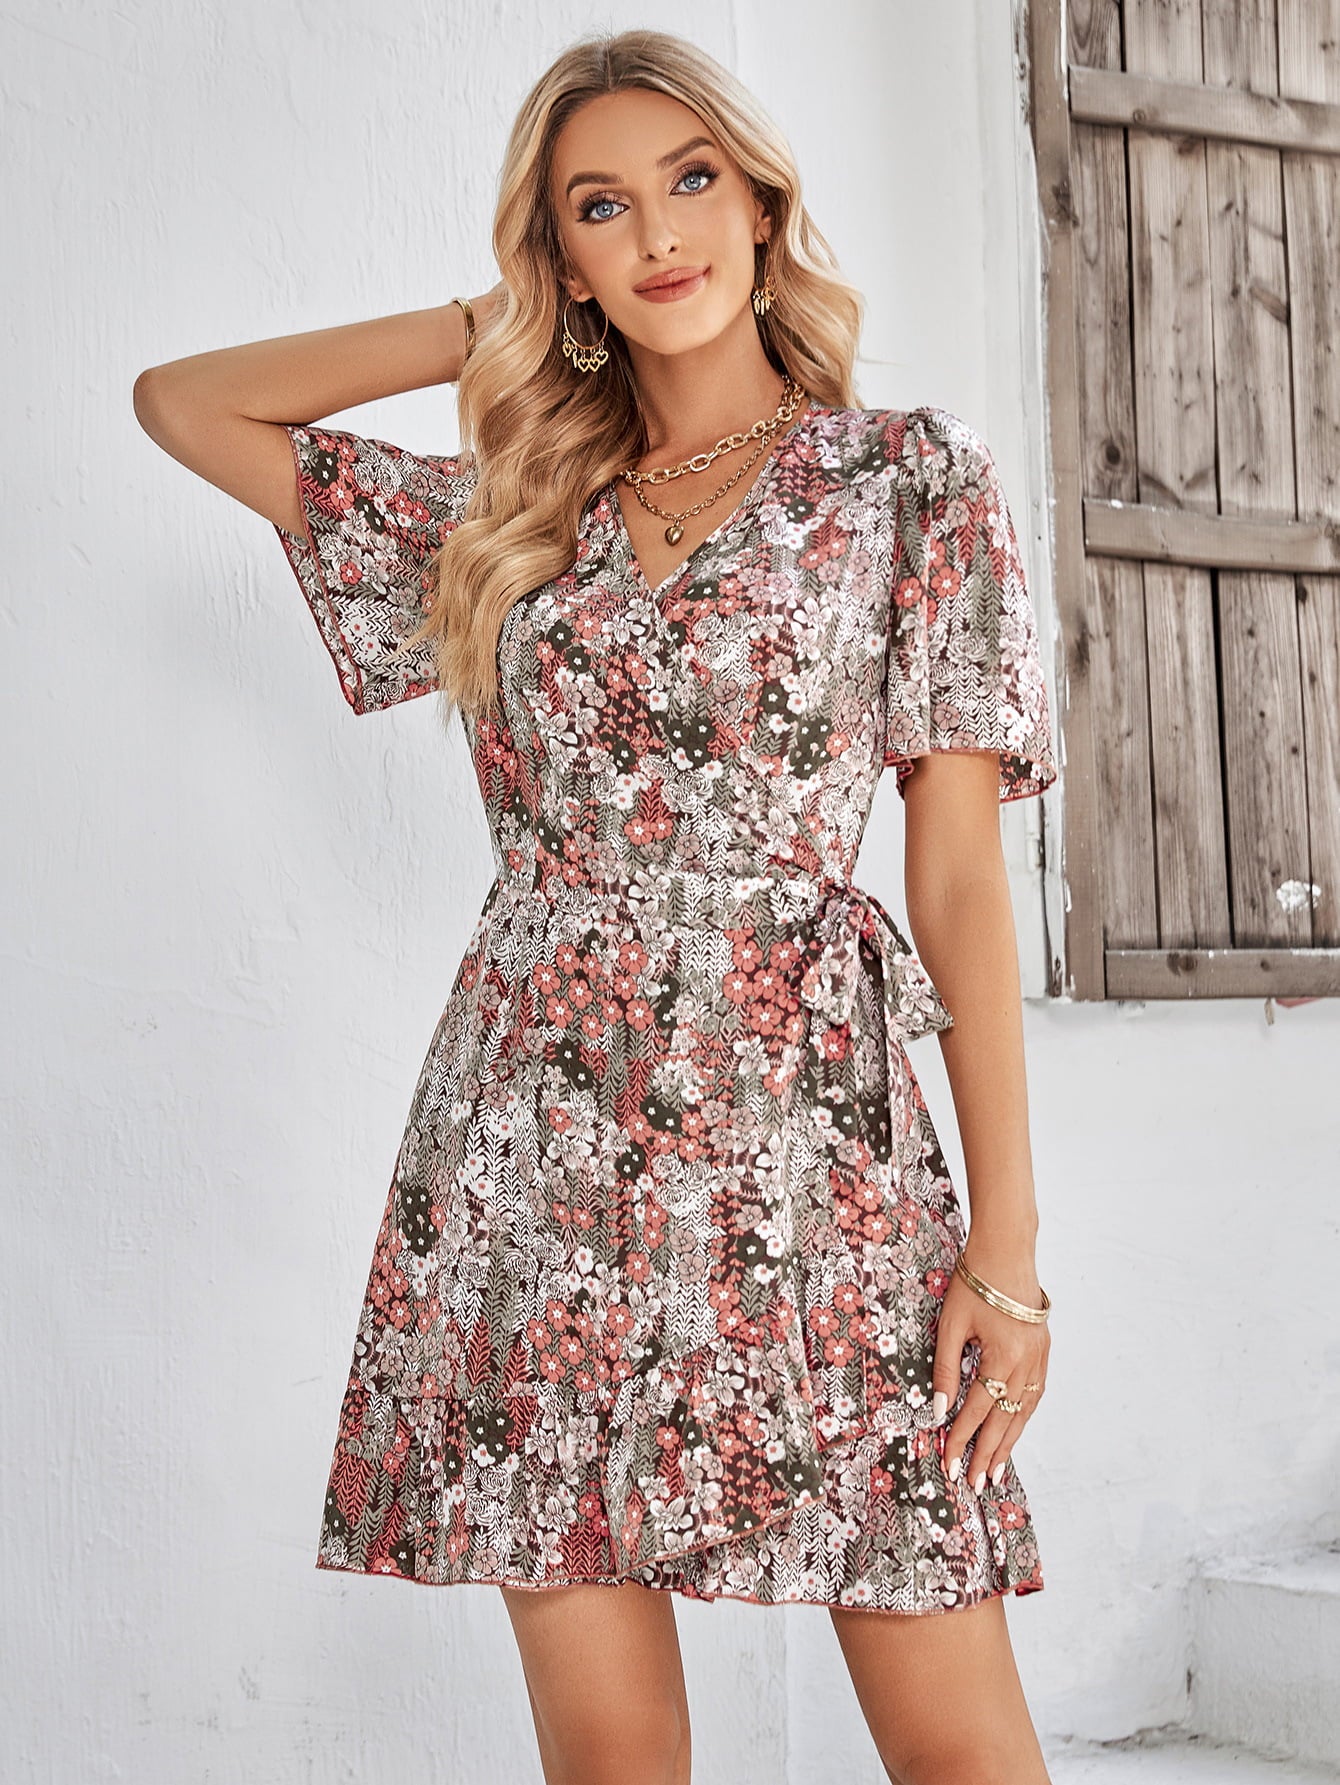 Short Sleeve Hem Dress: A dress with short sleeves and a stylish hemline, perfect for a fashionable and comfortable ensemble.